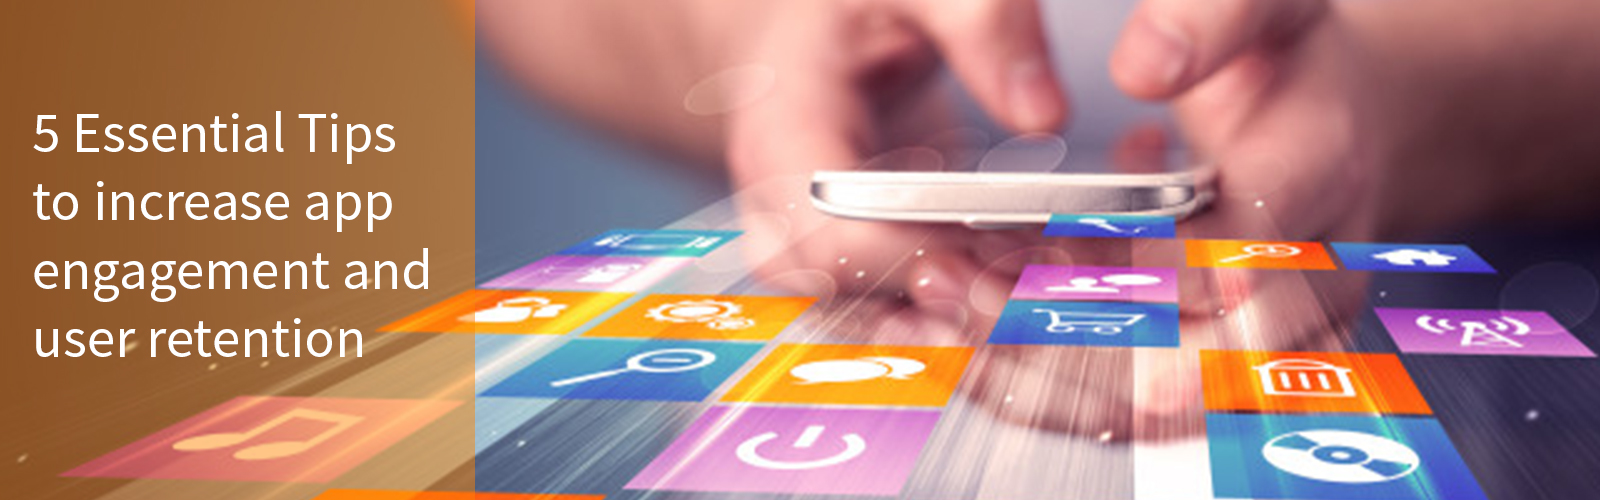 Tips to Increase App Engagement 